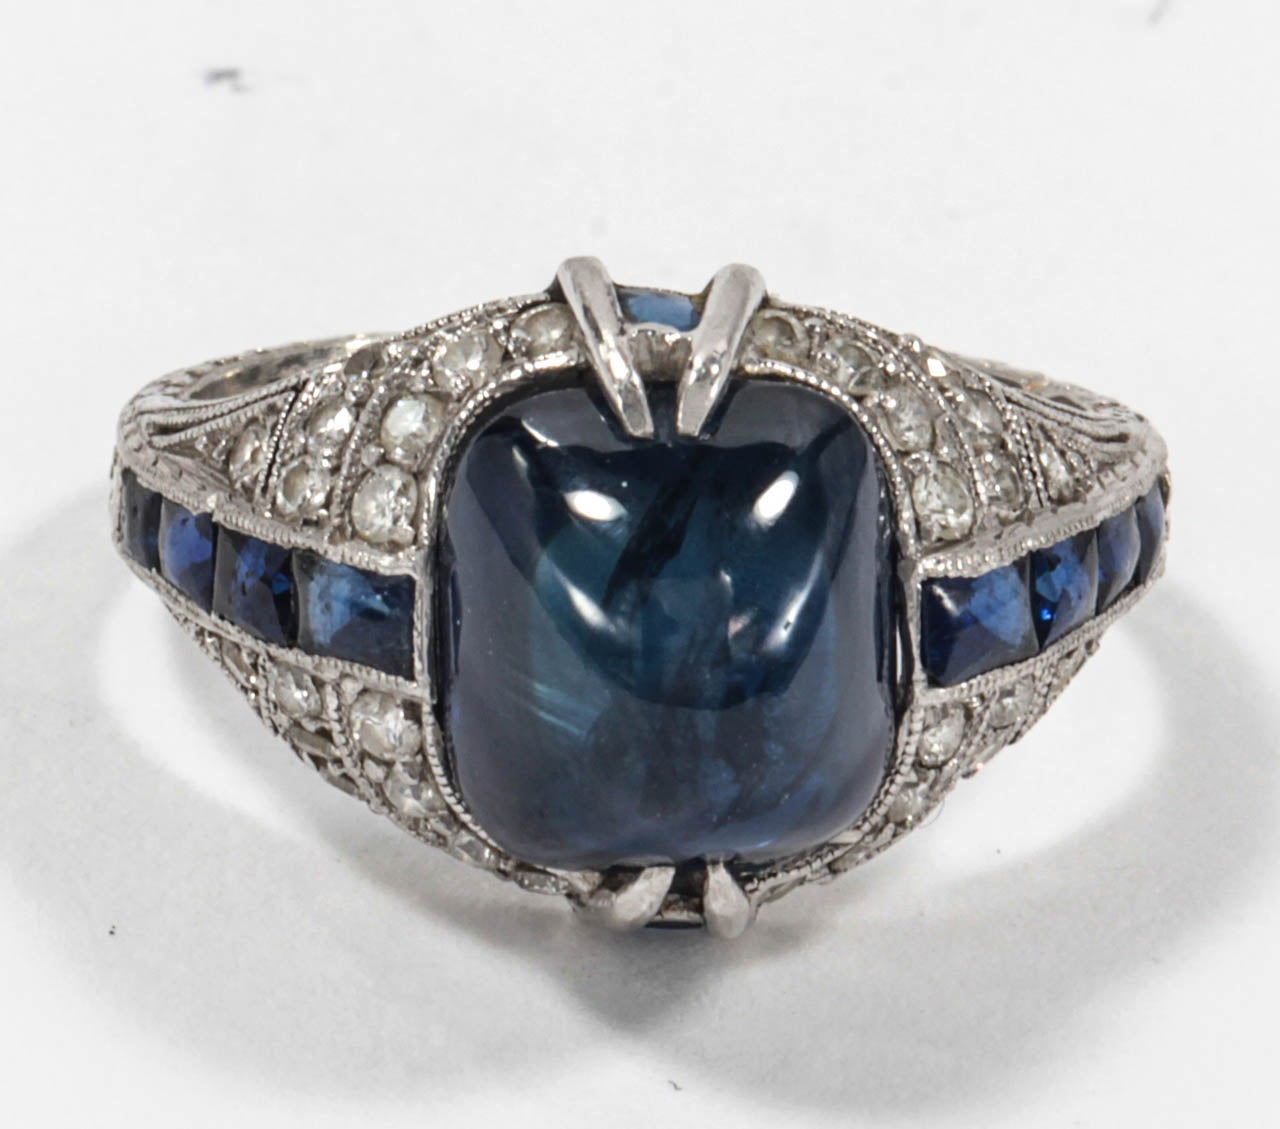 Set with a sugarloaf sapphire surrounded by a line of French-cut sapphires and brilliant-cut diamonds